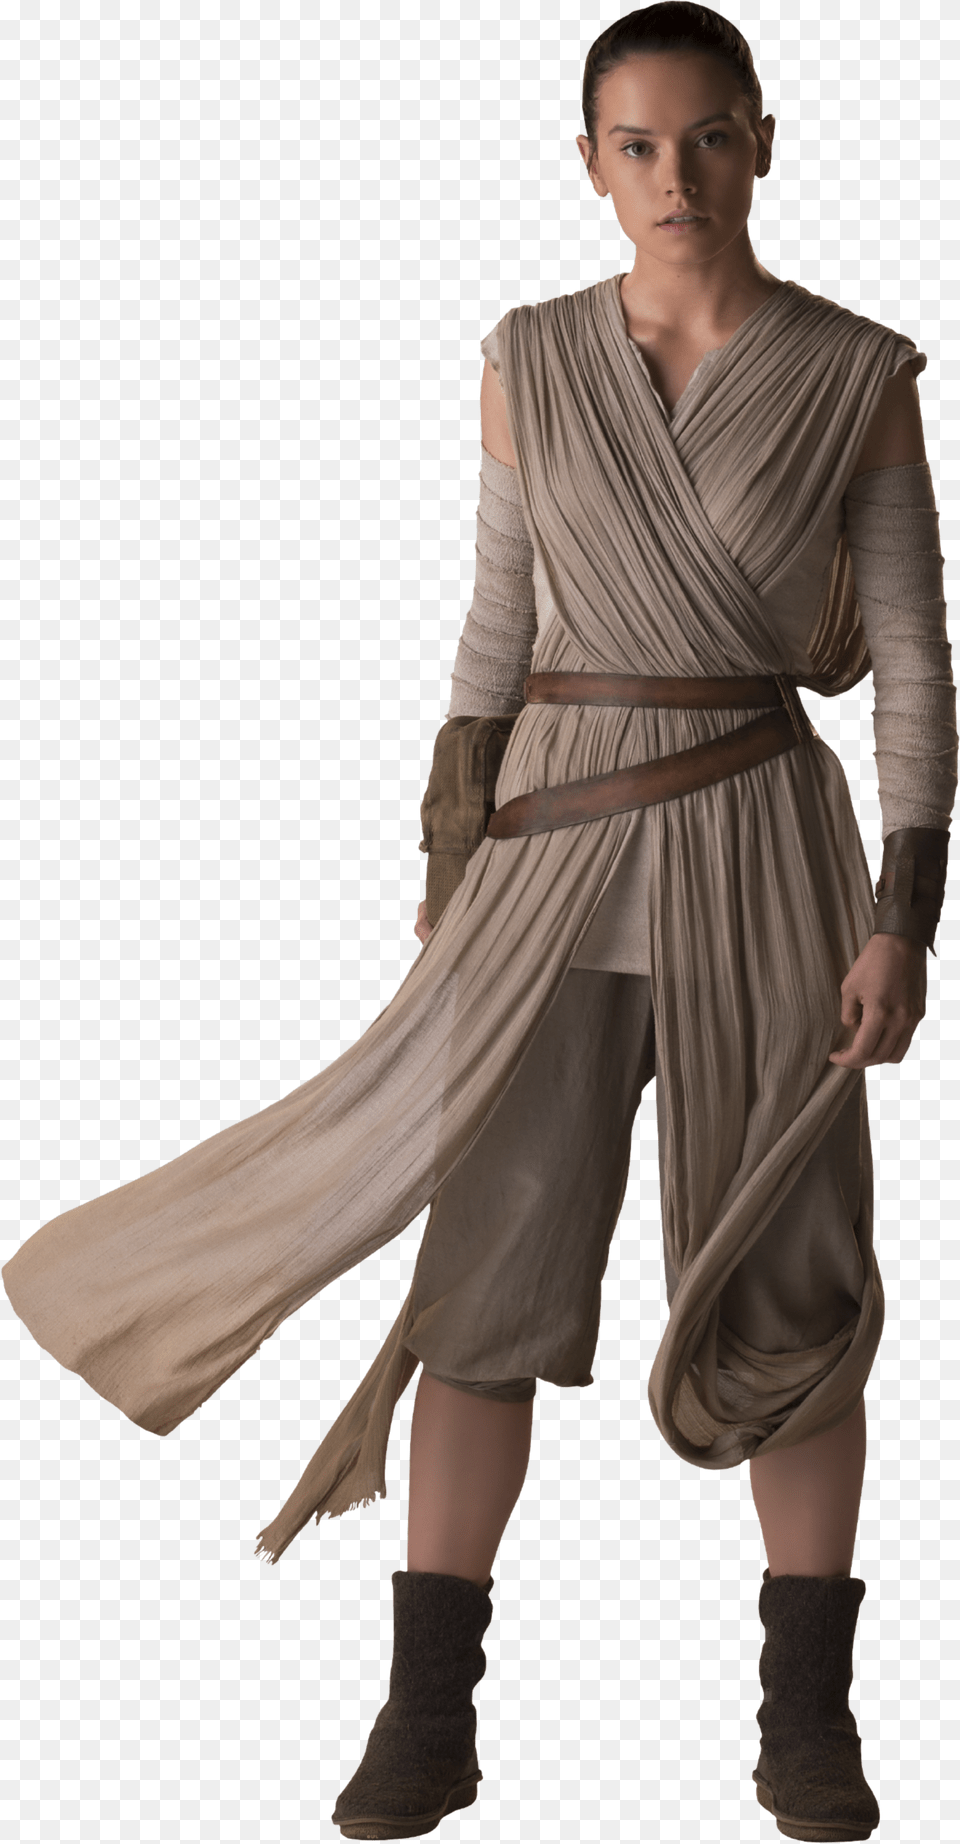 Rey Star Wars Daisy Ridley The Last Jedi Force Rey Star Wars Outfit, Clothing, Dress, Sleeve, Fashion Png Image